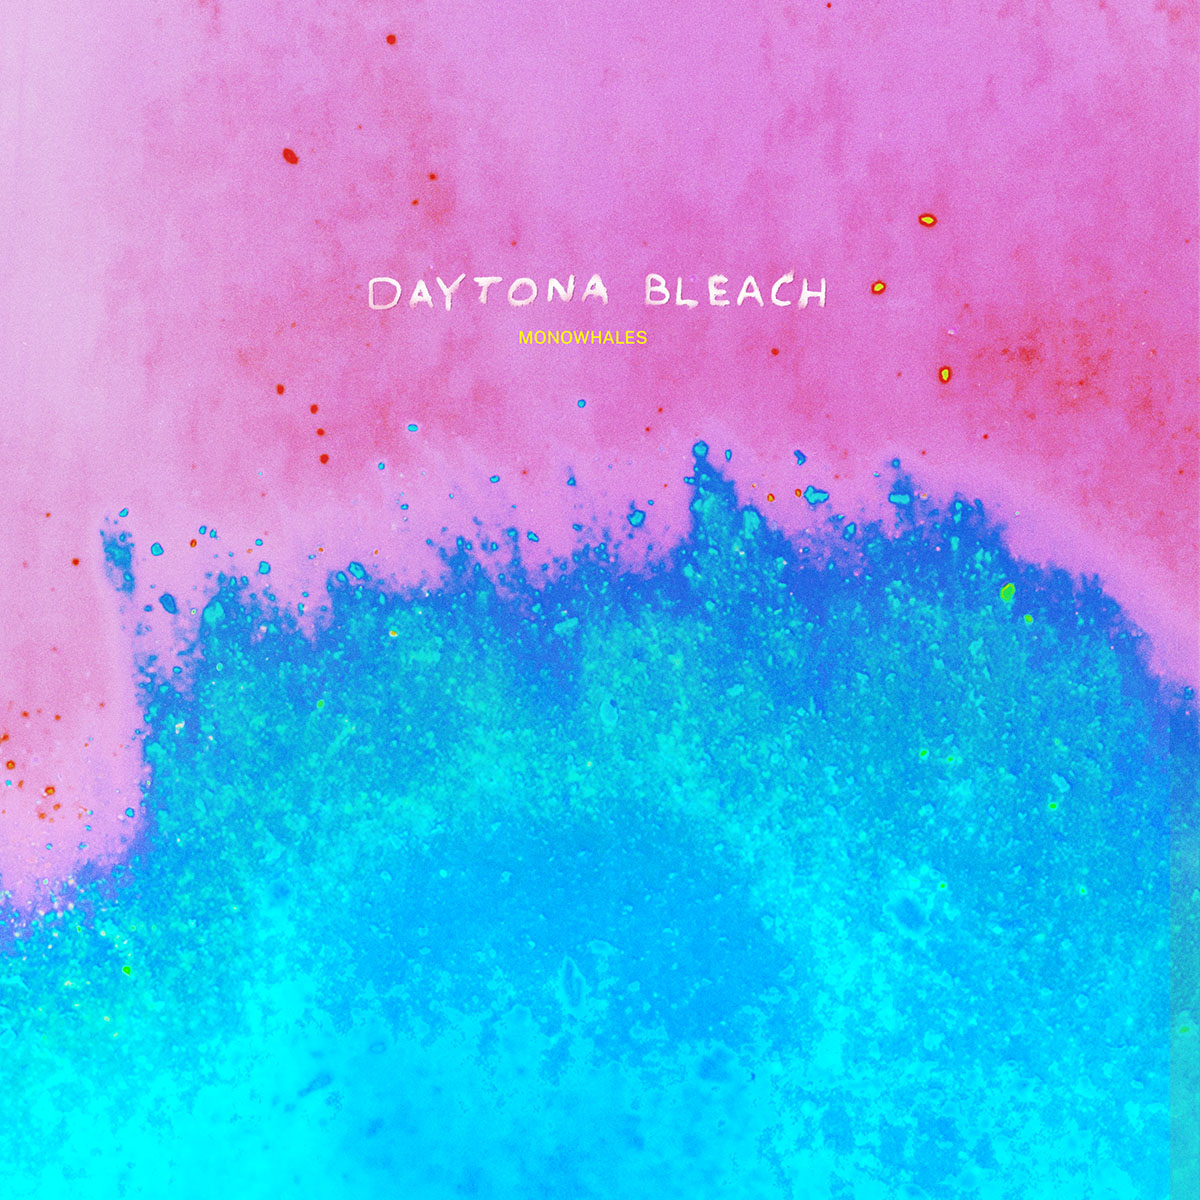 Monowhales Vow To Keep Momentum Rolling With Daytona Bleach Release